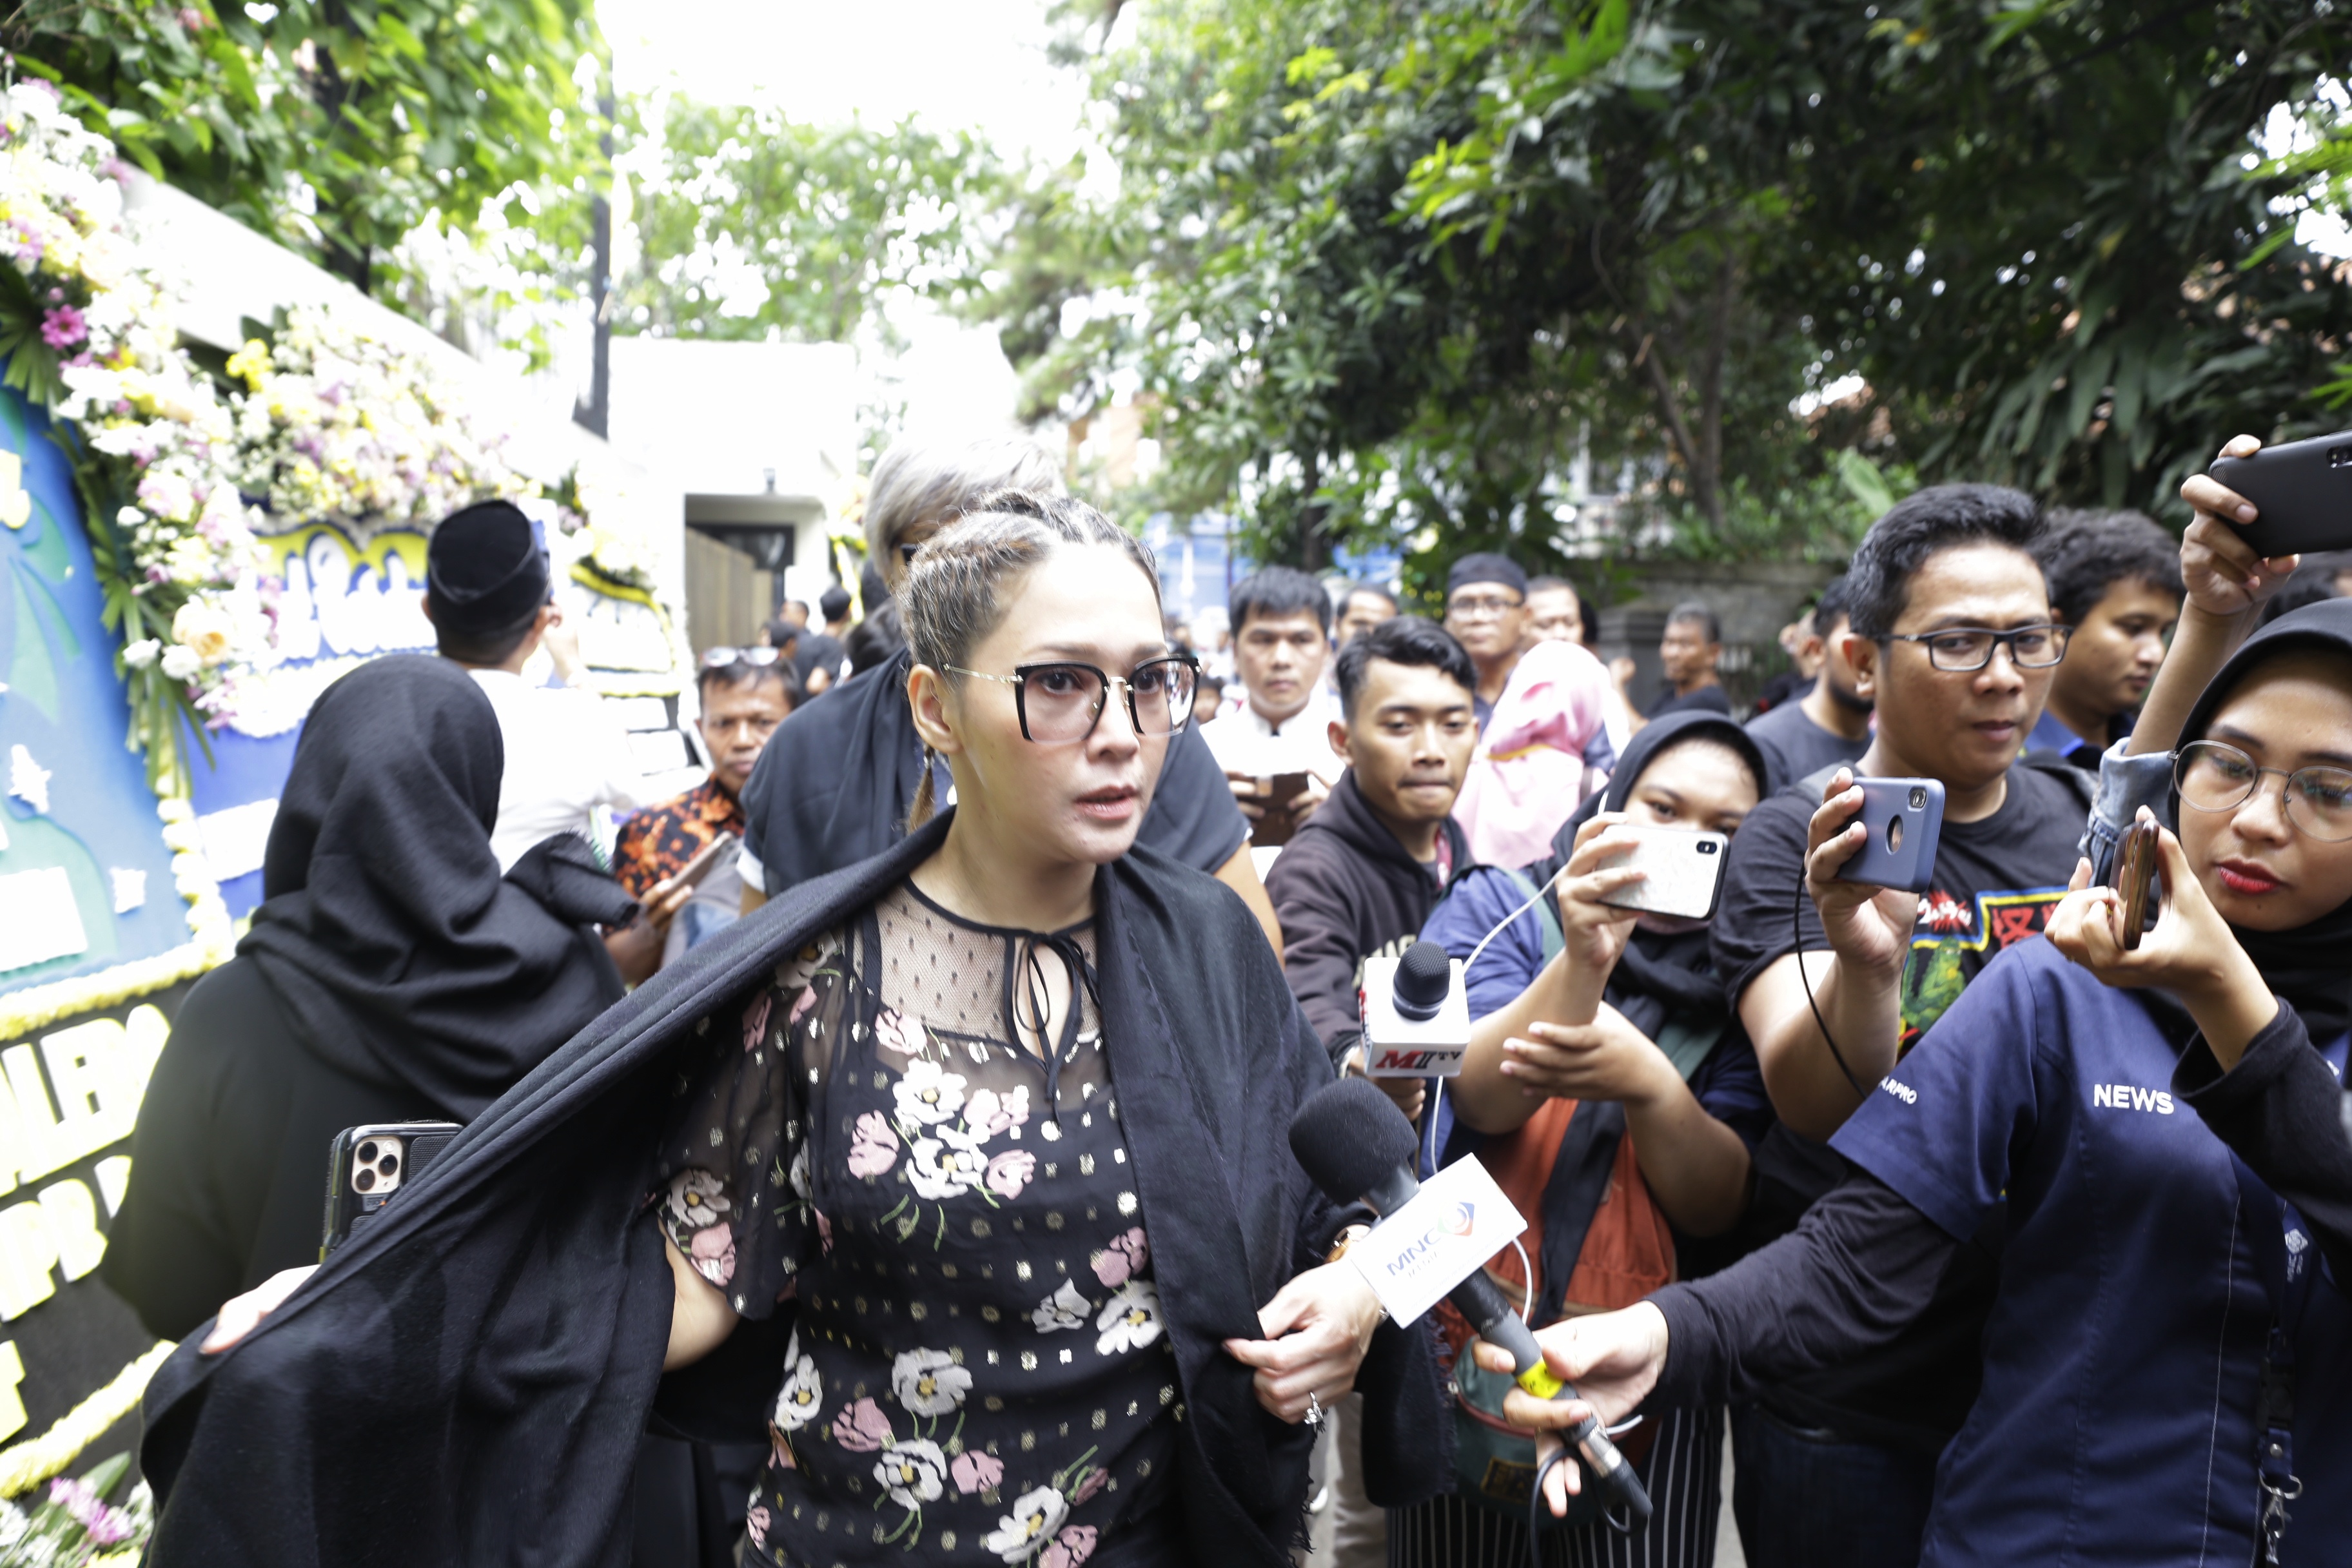 Maia Estianty, who last night was a judge together on INDONESIAN IDOL, also paid respects. (Bayu Herdianto)